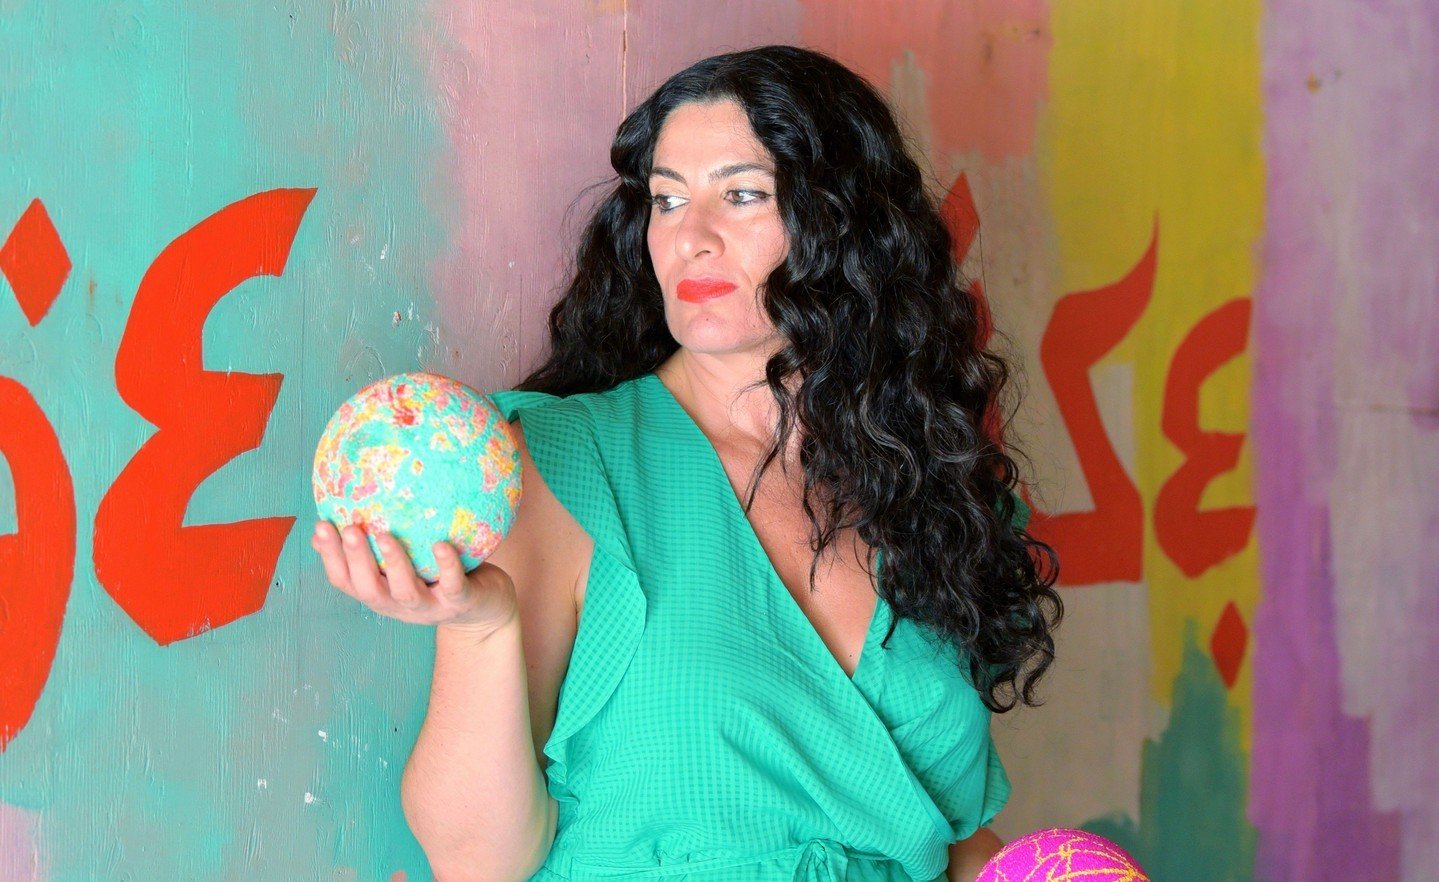 Parisa Parnian @savagemuse is a queer Iranian-American experiential curator, artist, designer,  and culinary innovator who uses food, design, and storytelling to bring people together. With a background in lifestyle design and event planning in NYC a